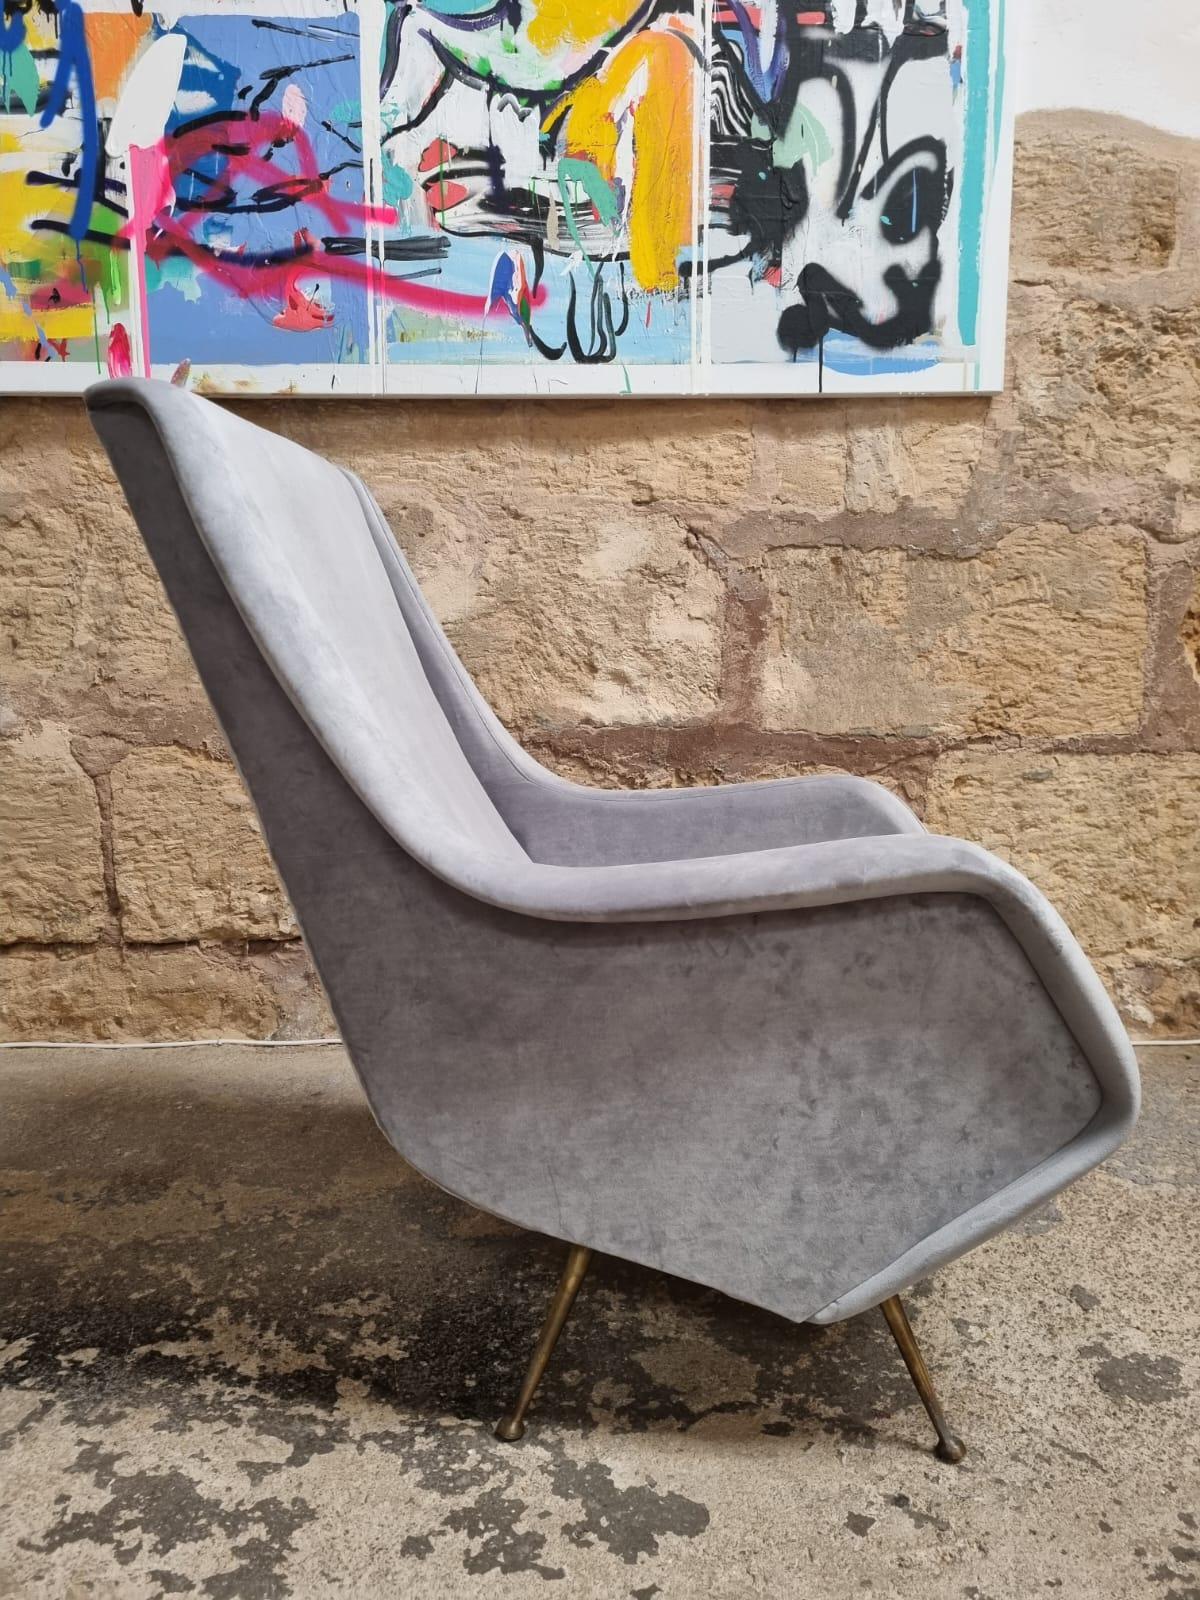 Vintage Aldo Morbelli Lounge Chairs for Isa Bergamo, Italy, 1950s For Sale 5